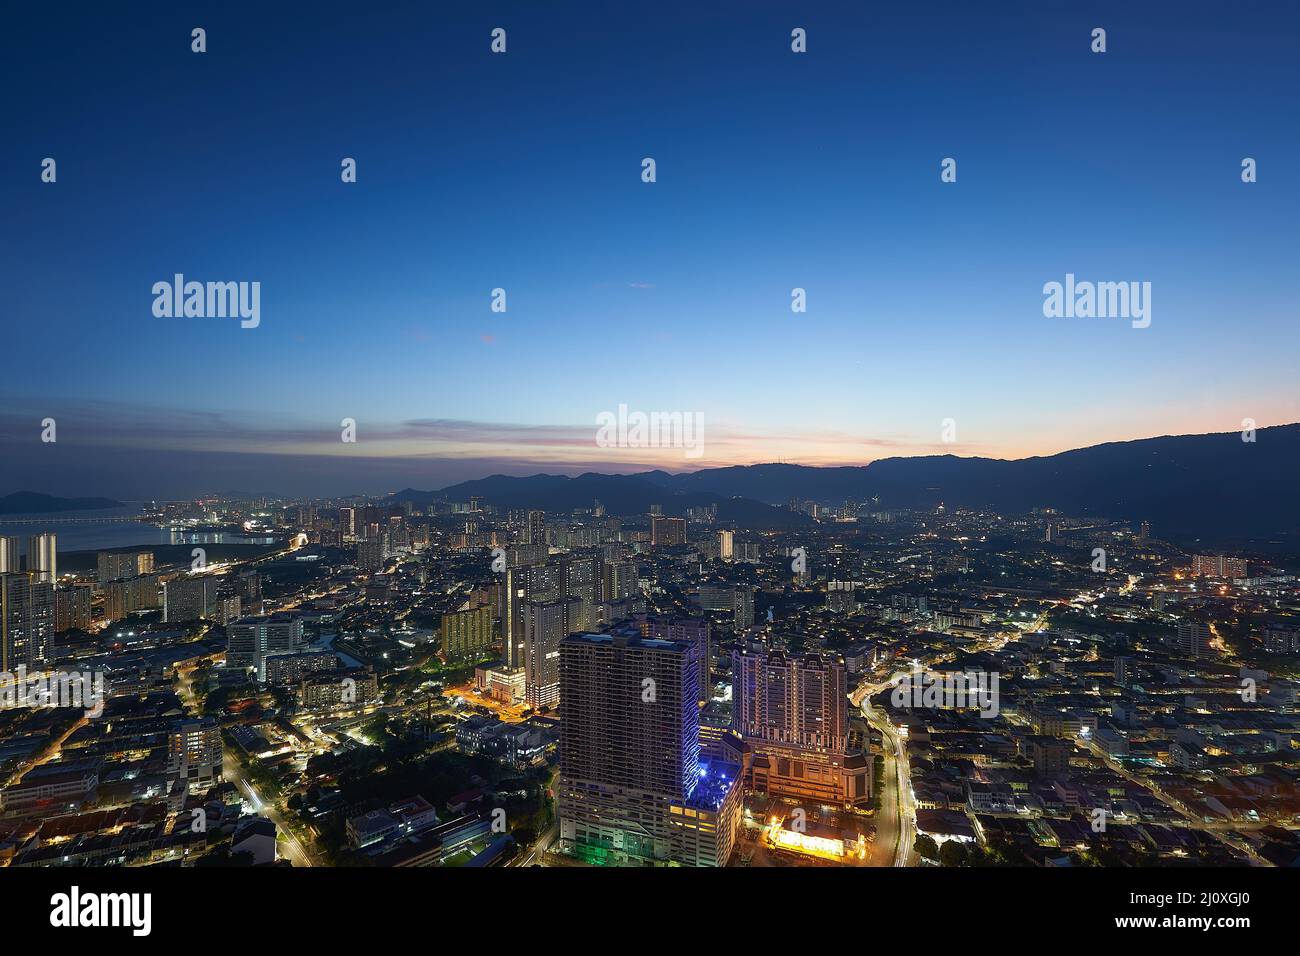 Aerial view of night cityscape Stock Photo